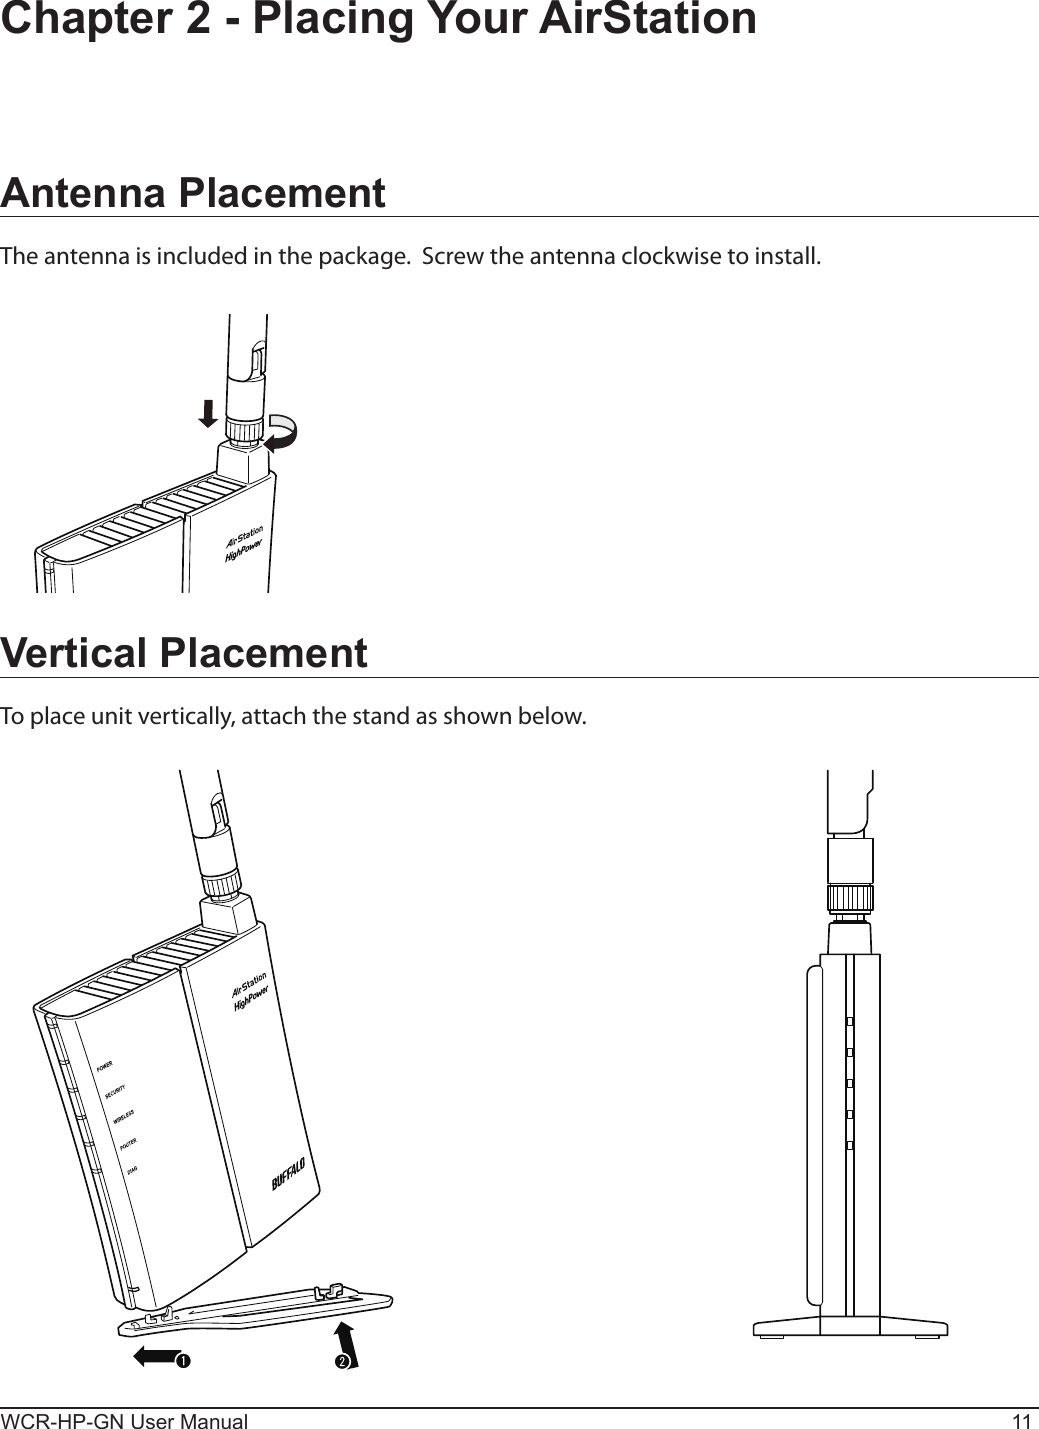 1WCR-HP-GN User Manual 11Chapter 2 - Placing Your AirStationVertical PlacementTo place unit vertically, attach the stand as shown below.Antenna PlacementThe antenna is included in the package.  Screw the antenna clockwise to install.